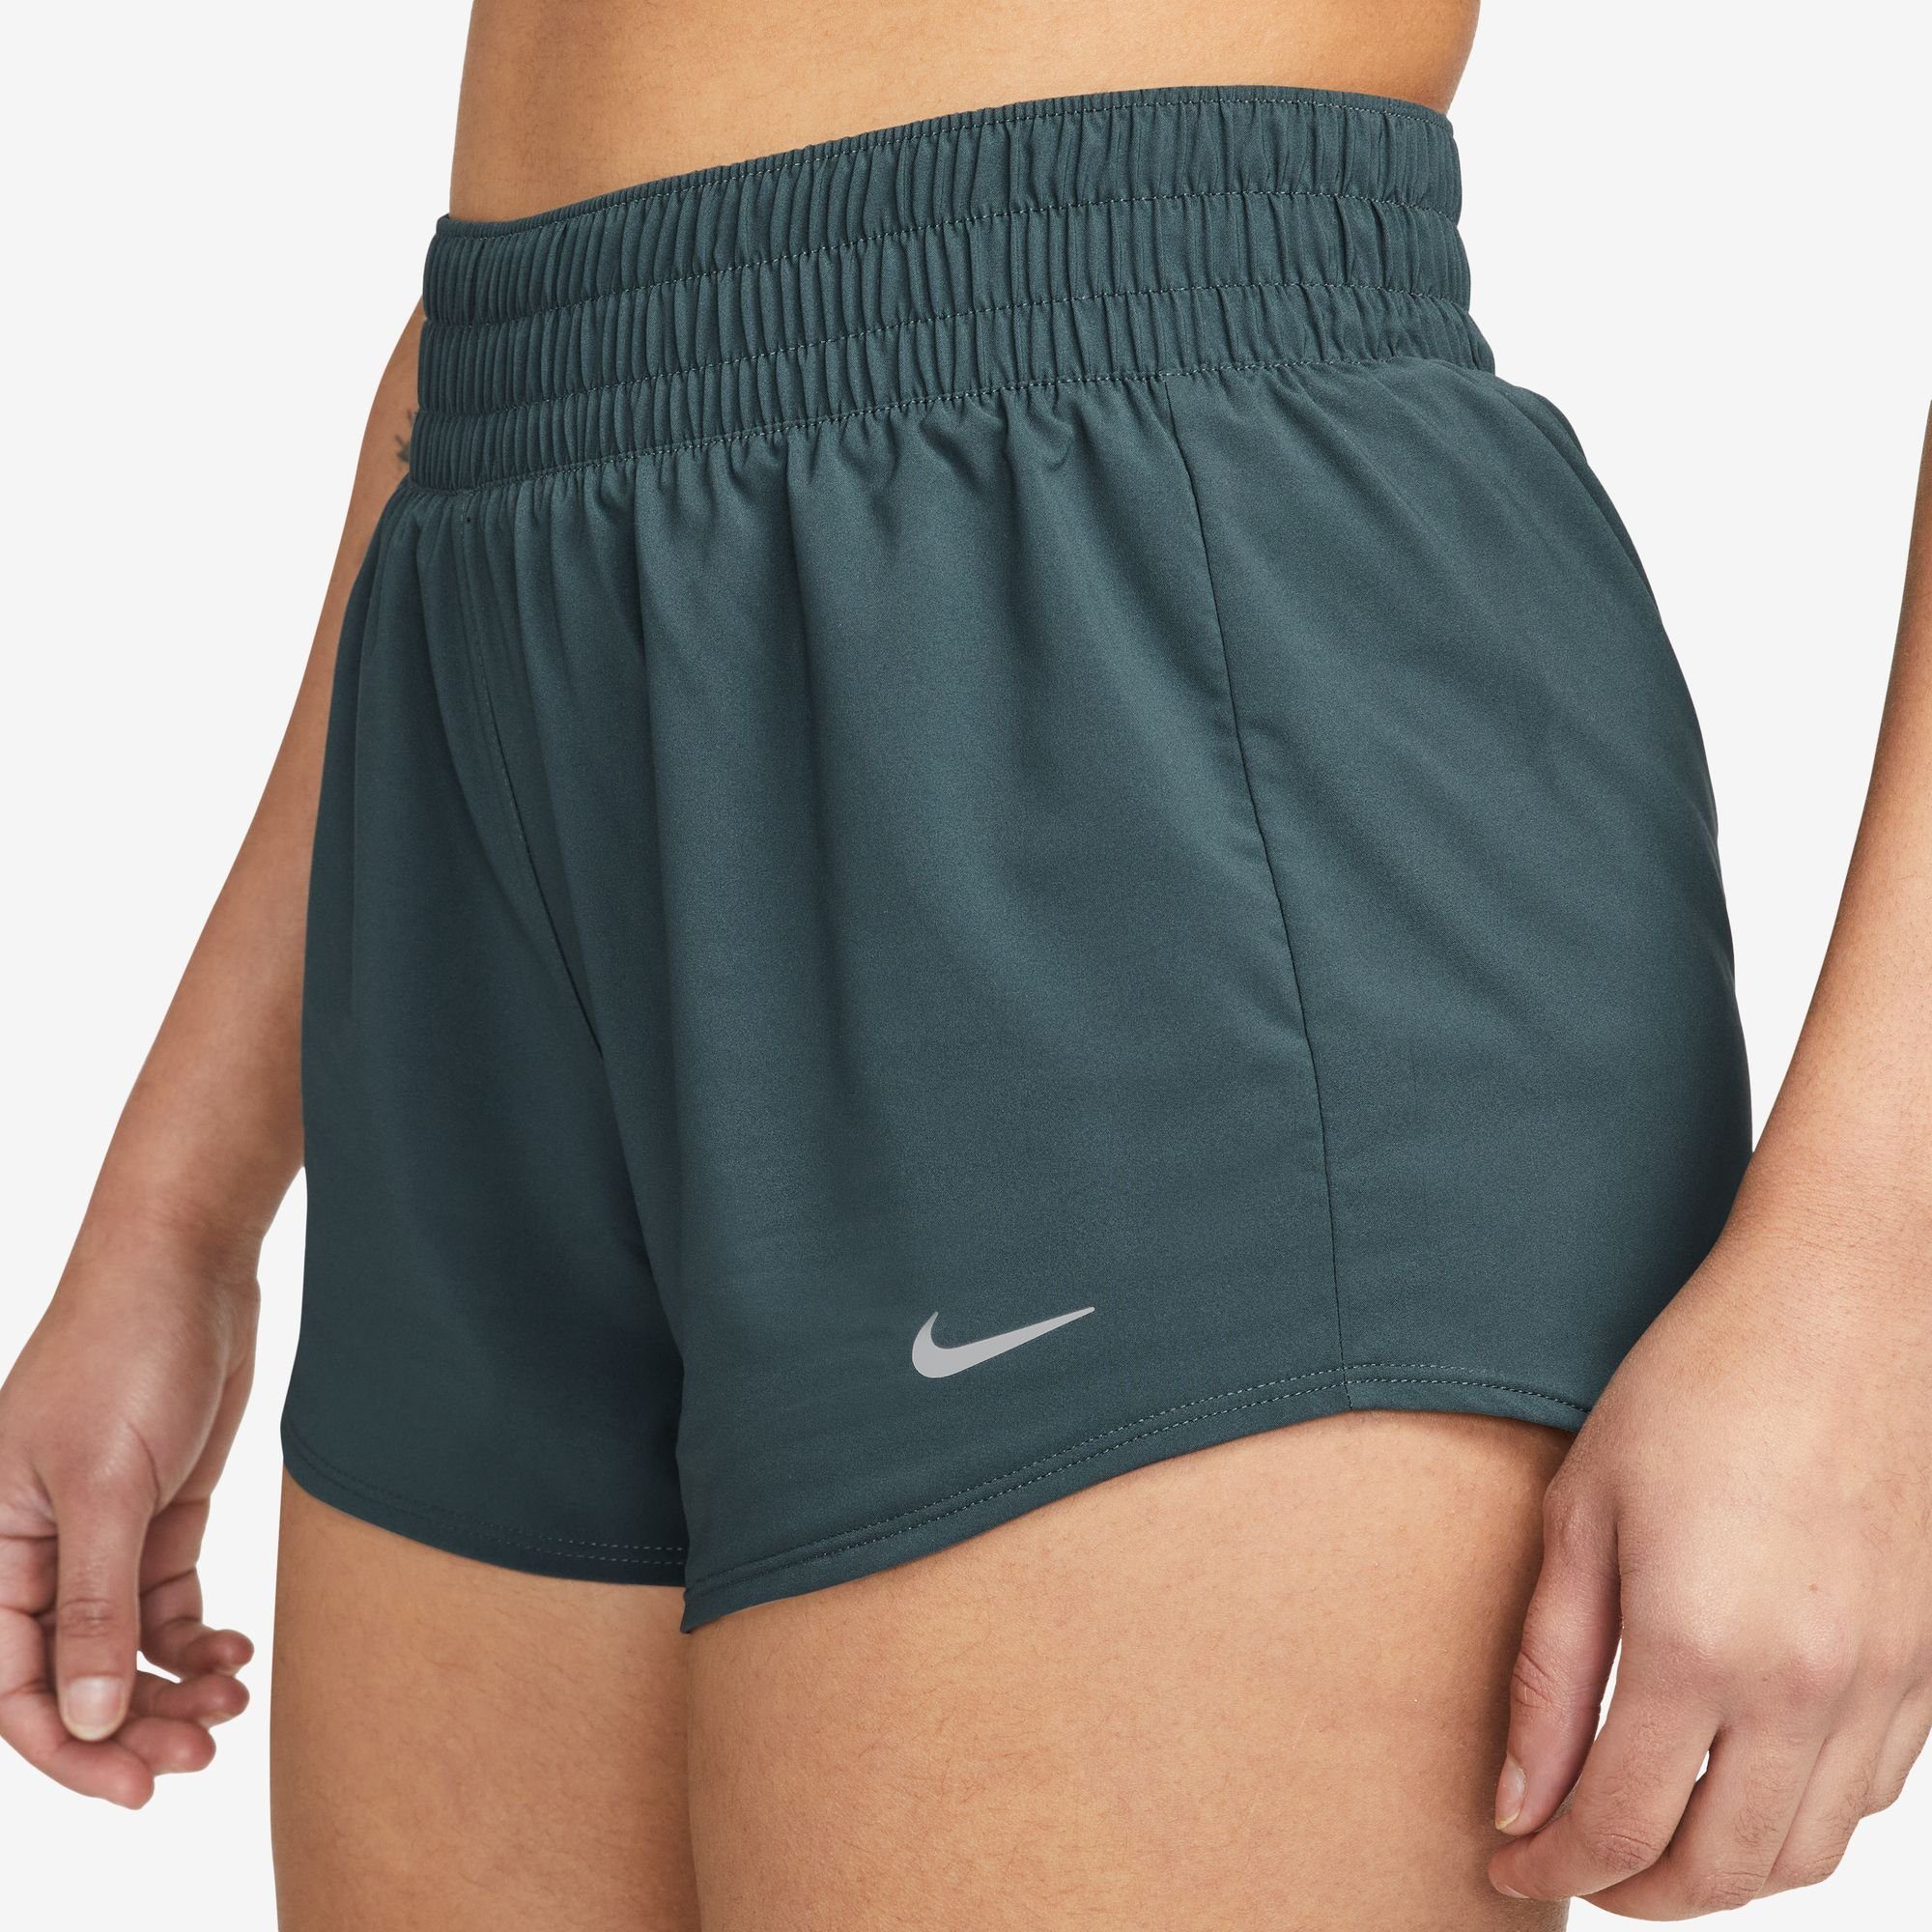 Nike Trainingsshorts DRI-FIT ONE JUNGLE/REFLECTIVE MID-RISE BRIEF-LINED DEEP SILV WOMEN'S SHORTS